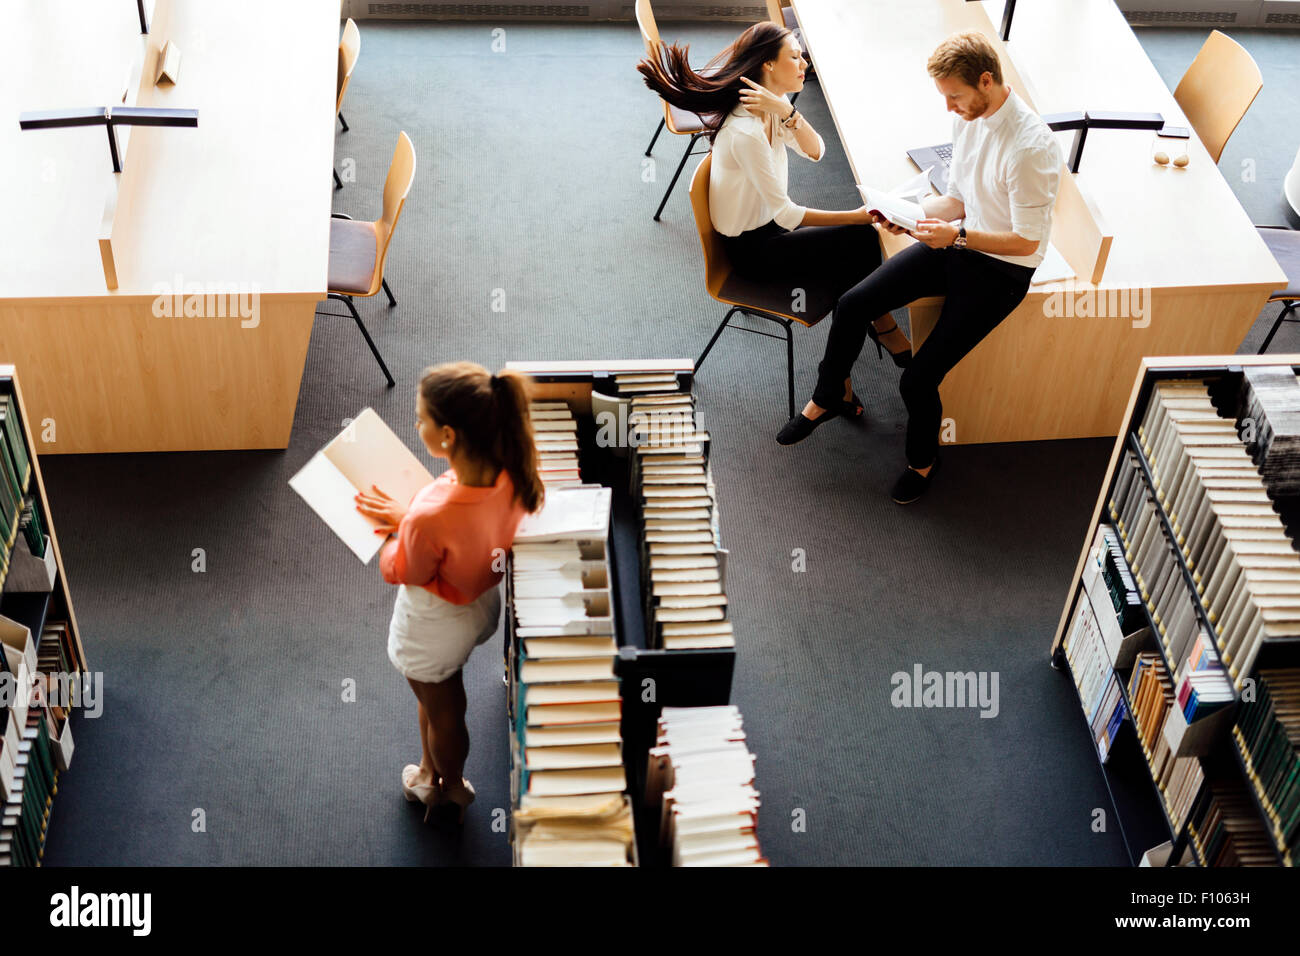 Group of students studying in a library and educating themselves Stock Photo